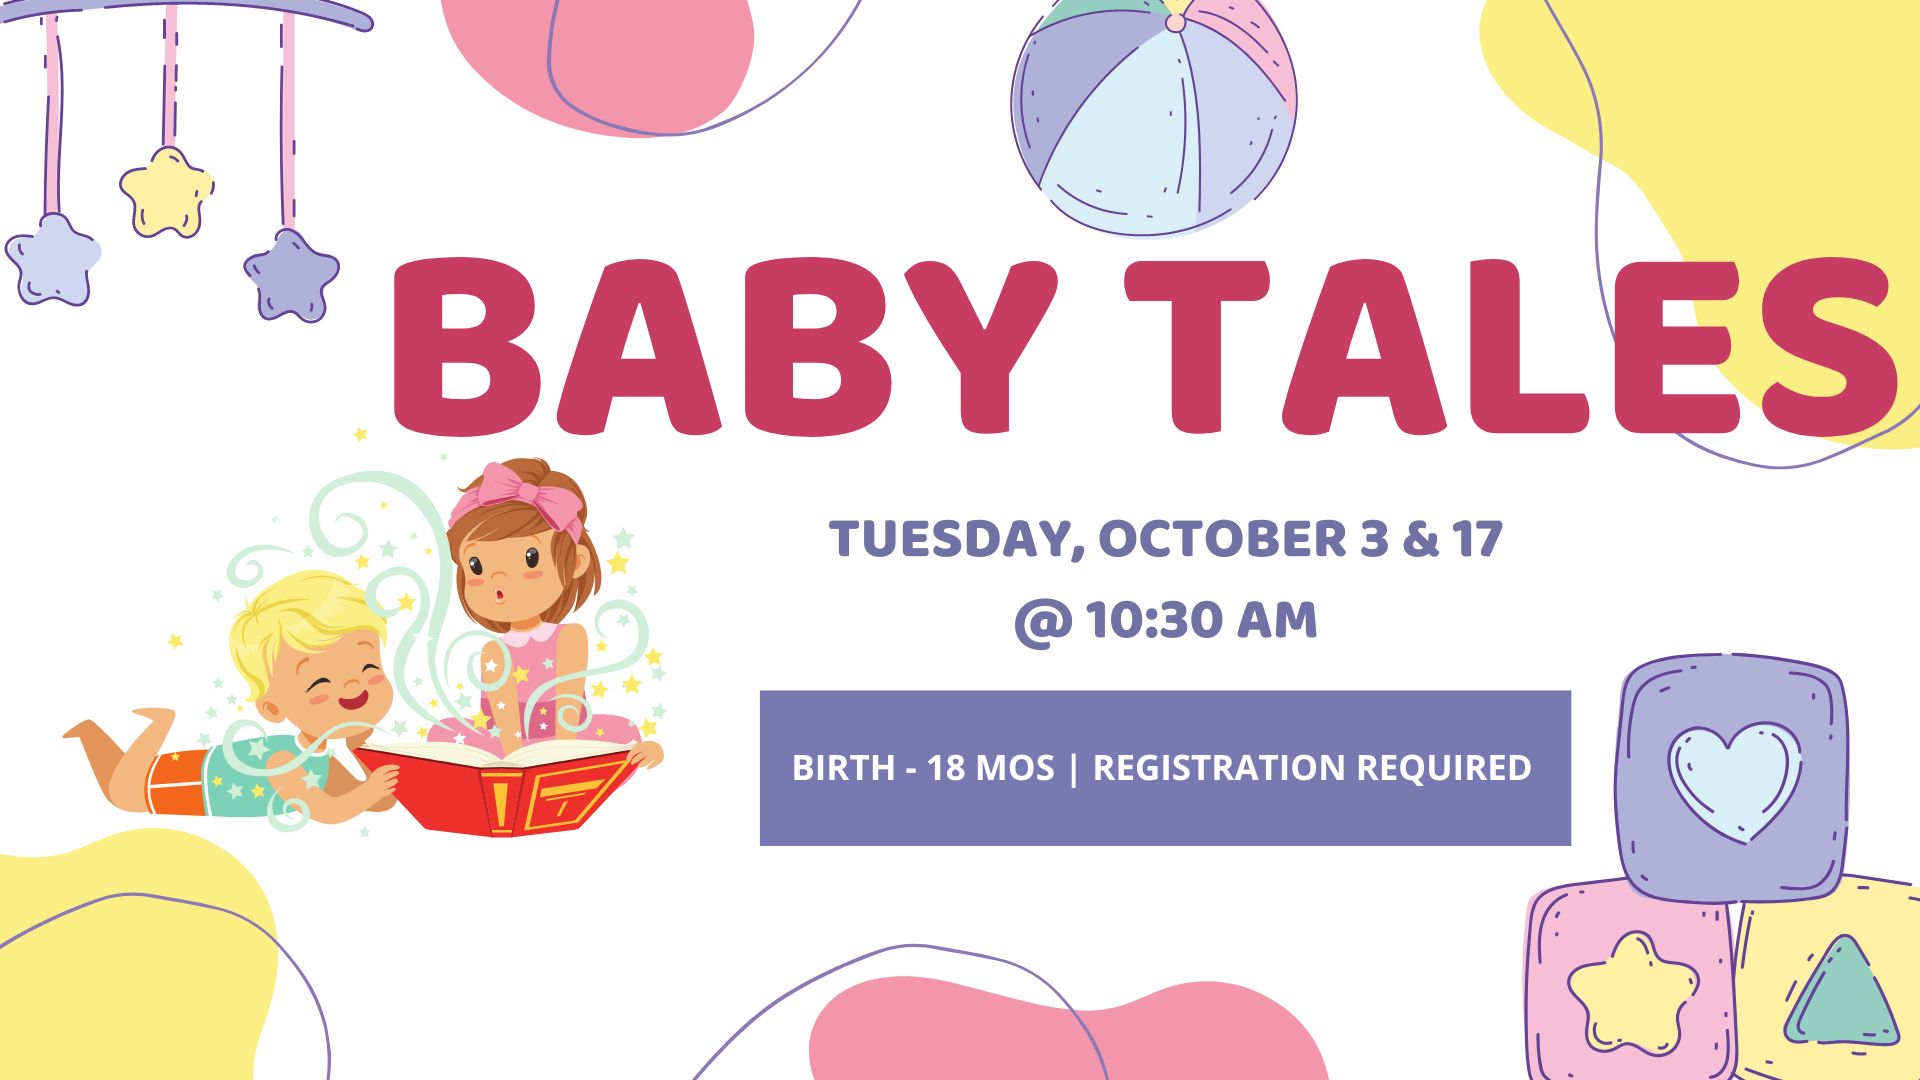 Graphics of Babies sitting and laying down.  Pastel colored baby mobile, a ball, and blocks  Text reads: Baby Tales,  Tuesday, October 3 and 17.  Ages Birth through 18 months. Registration required.